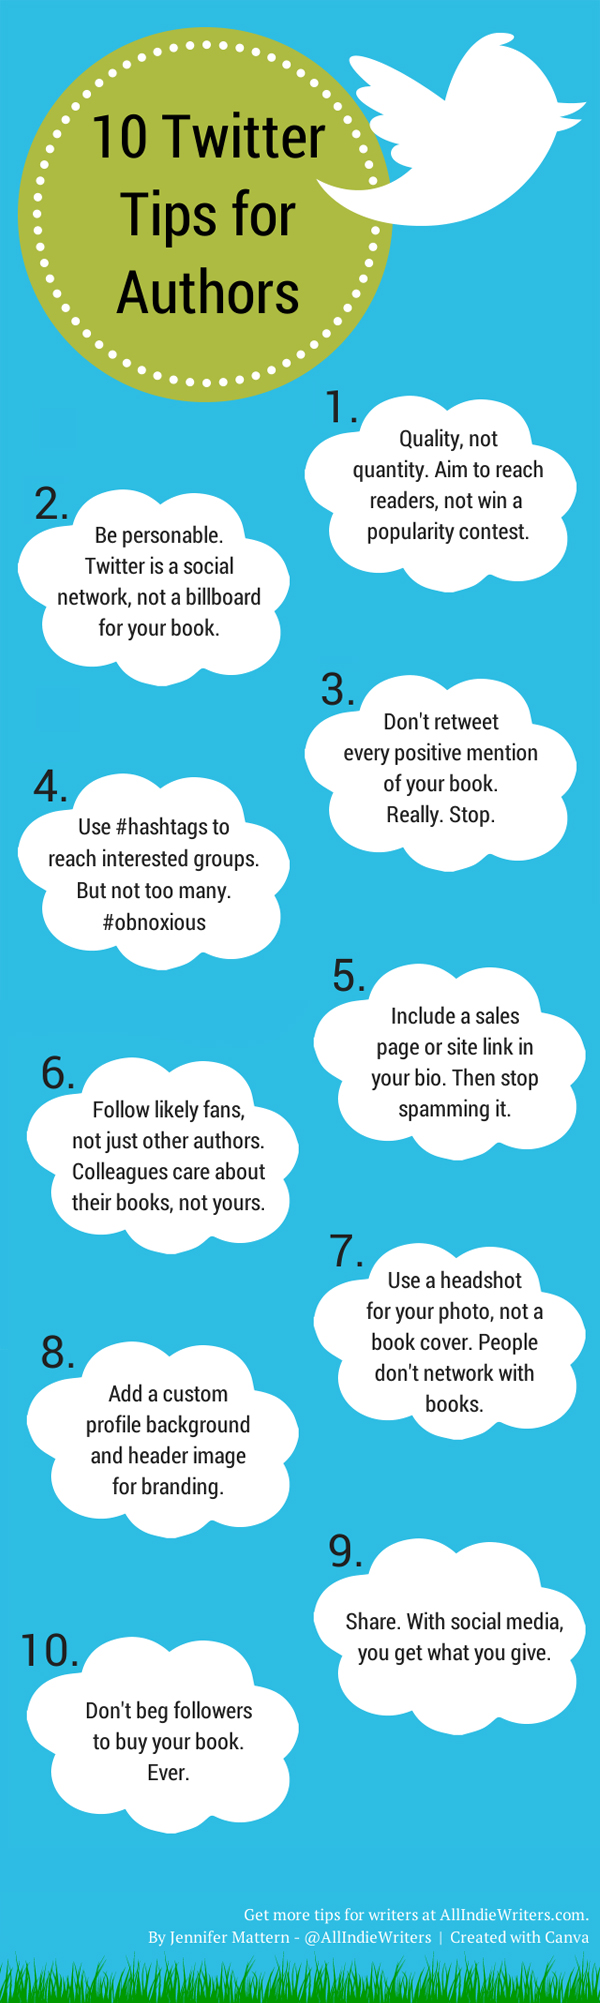 10 Twitter Tips for Authors